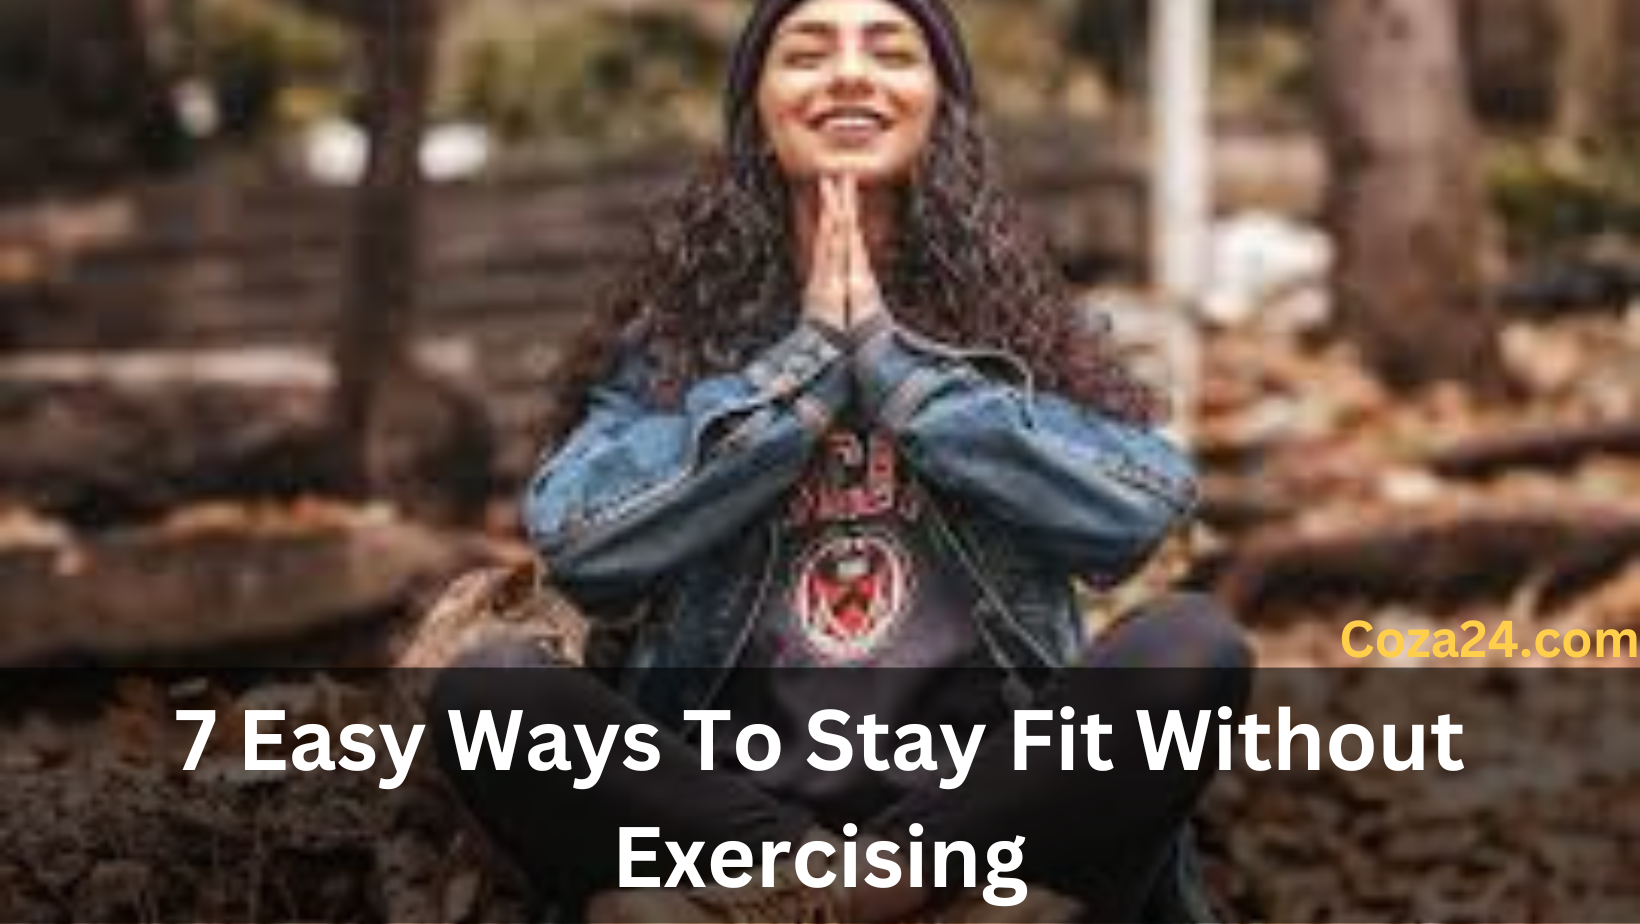 7 Easy Ways To Stay Fit Without Exercising